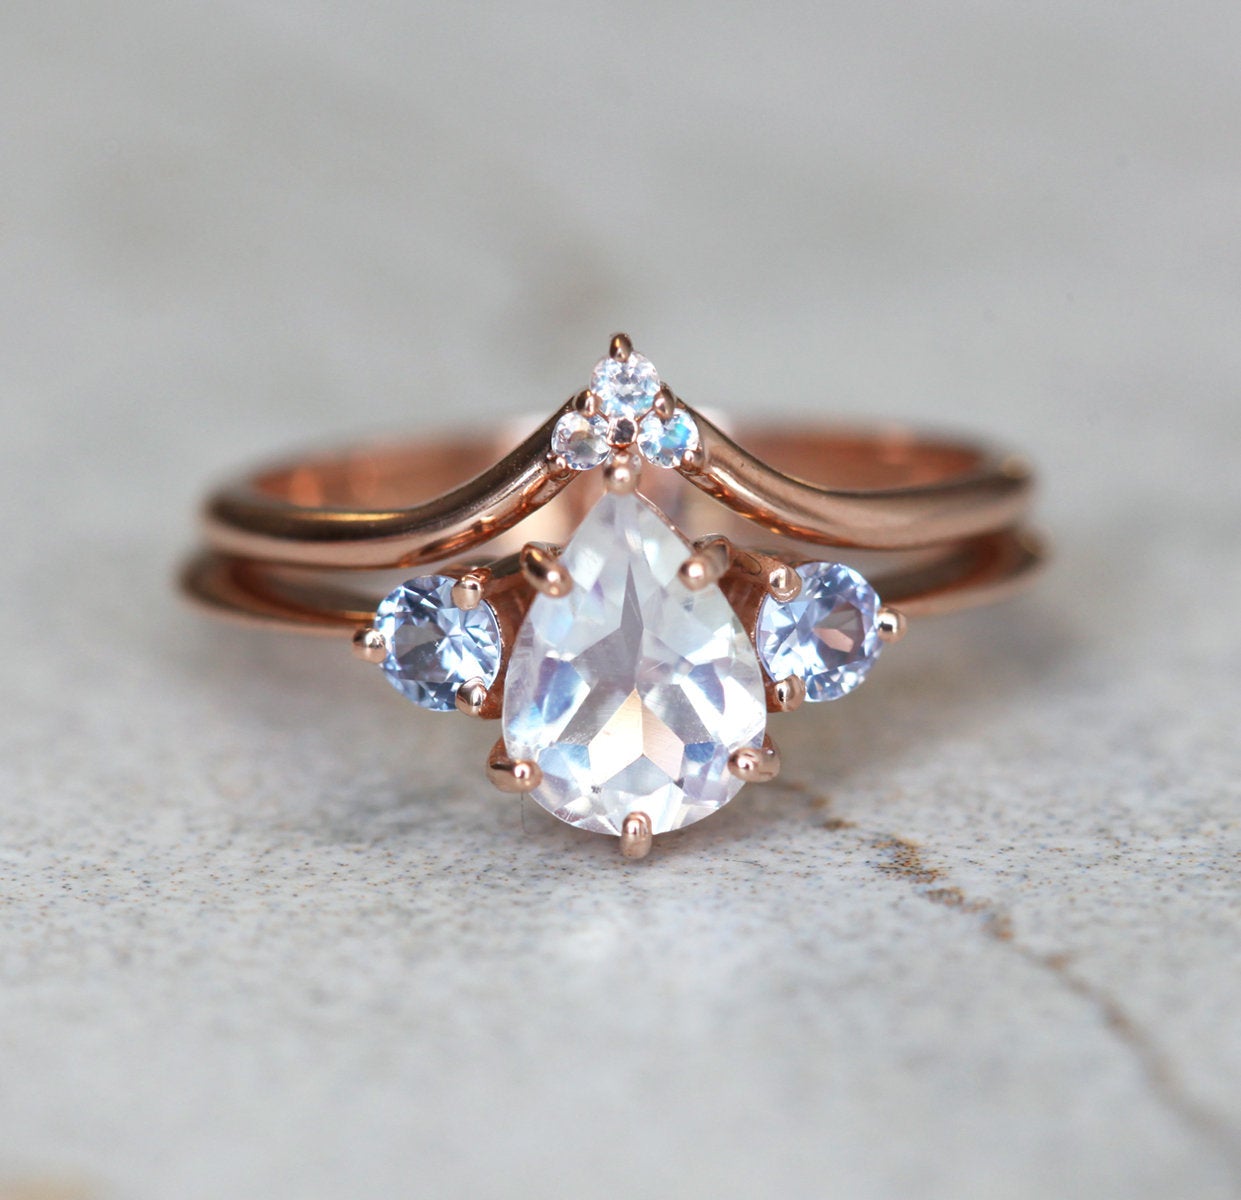 Pear-shaped blue moonstone ring with sapphire gemstones